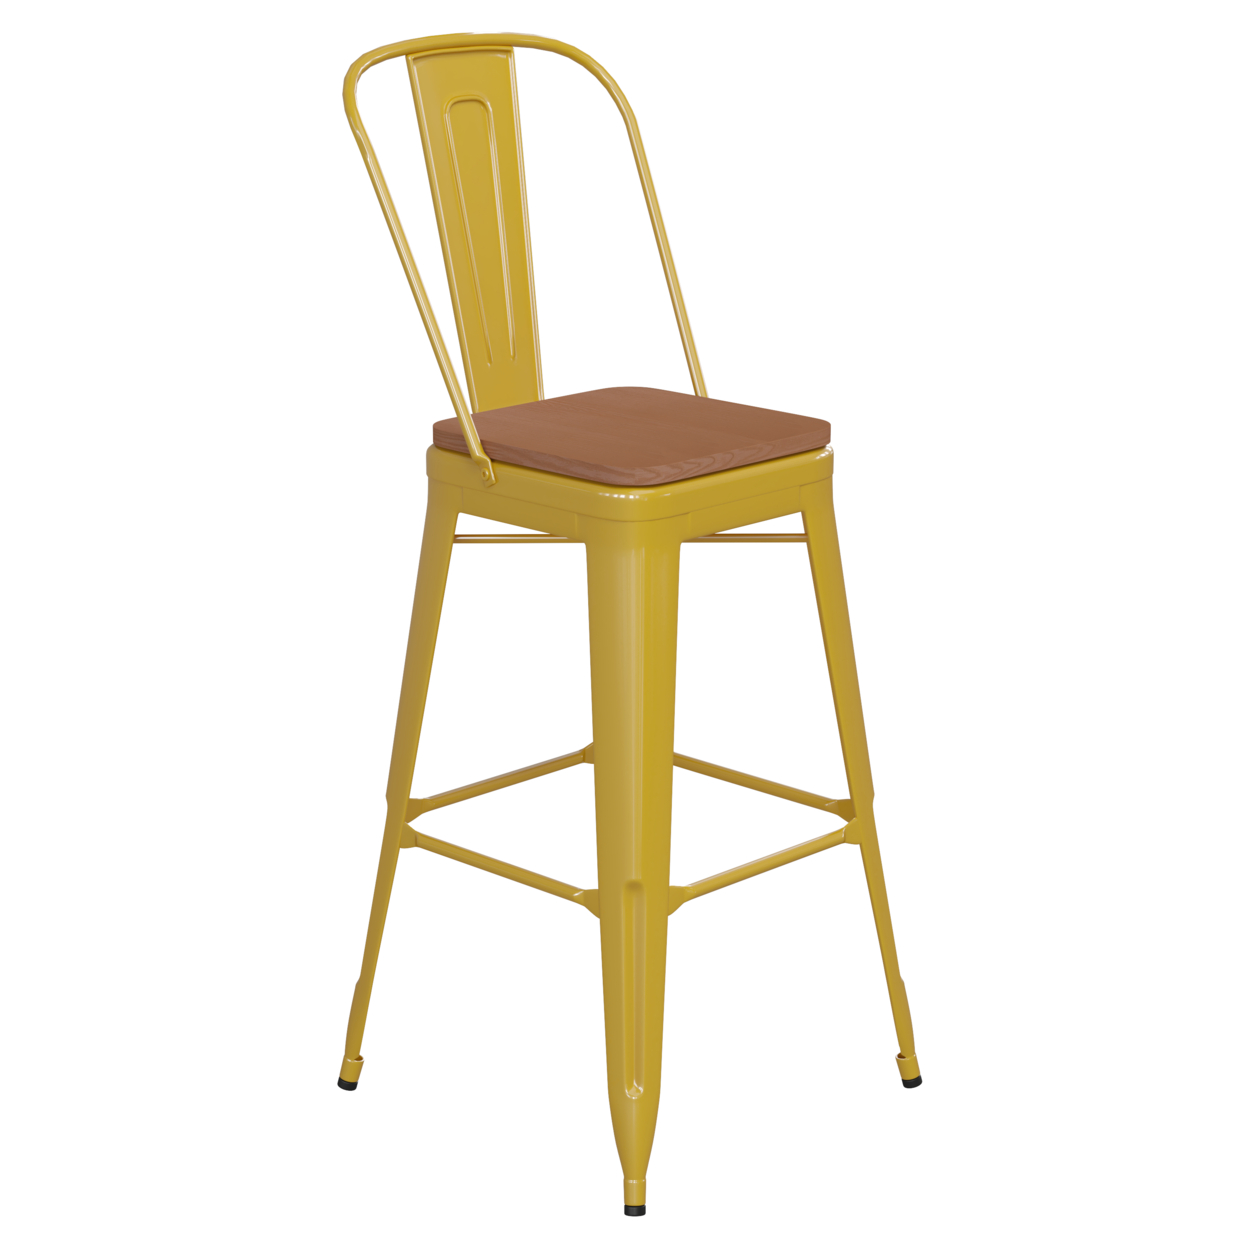 30 Inch Metal Chair, Curved Design Back, Polyresin Sleek Seat, Yellow